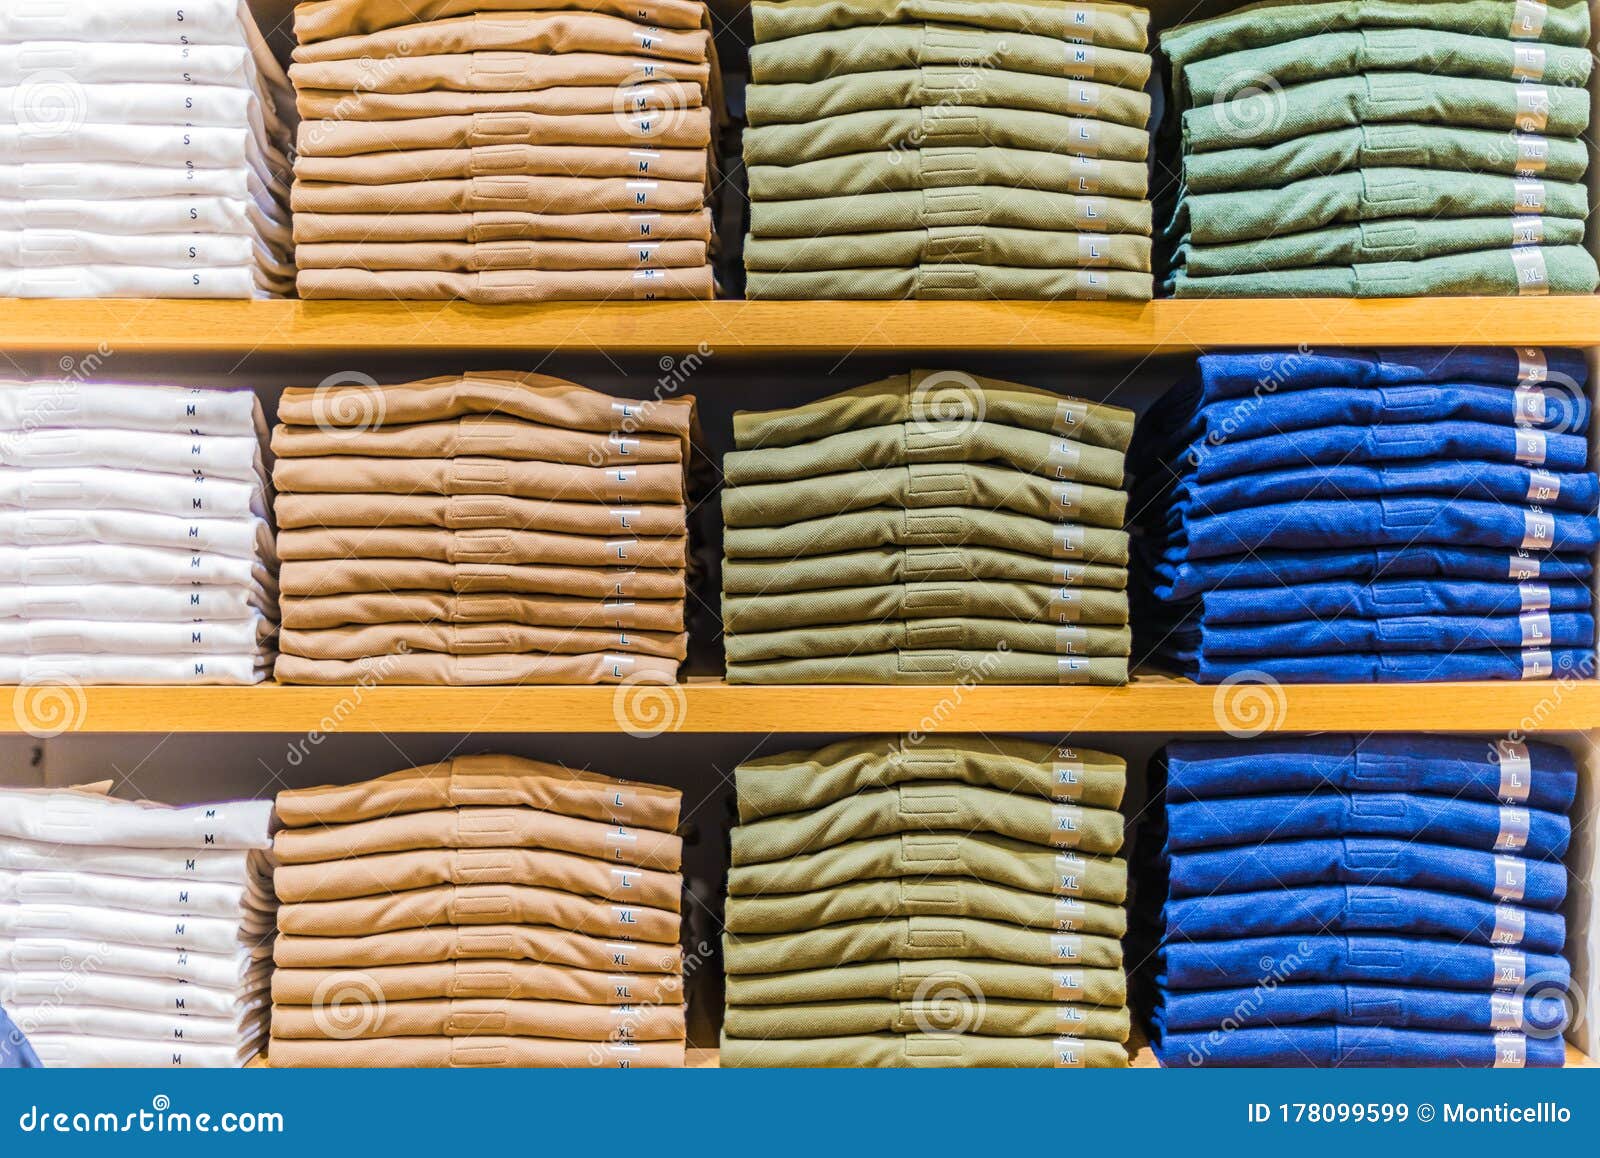 Clothing Products on the Shelf in a Clothing Store Stock Image - Image ...